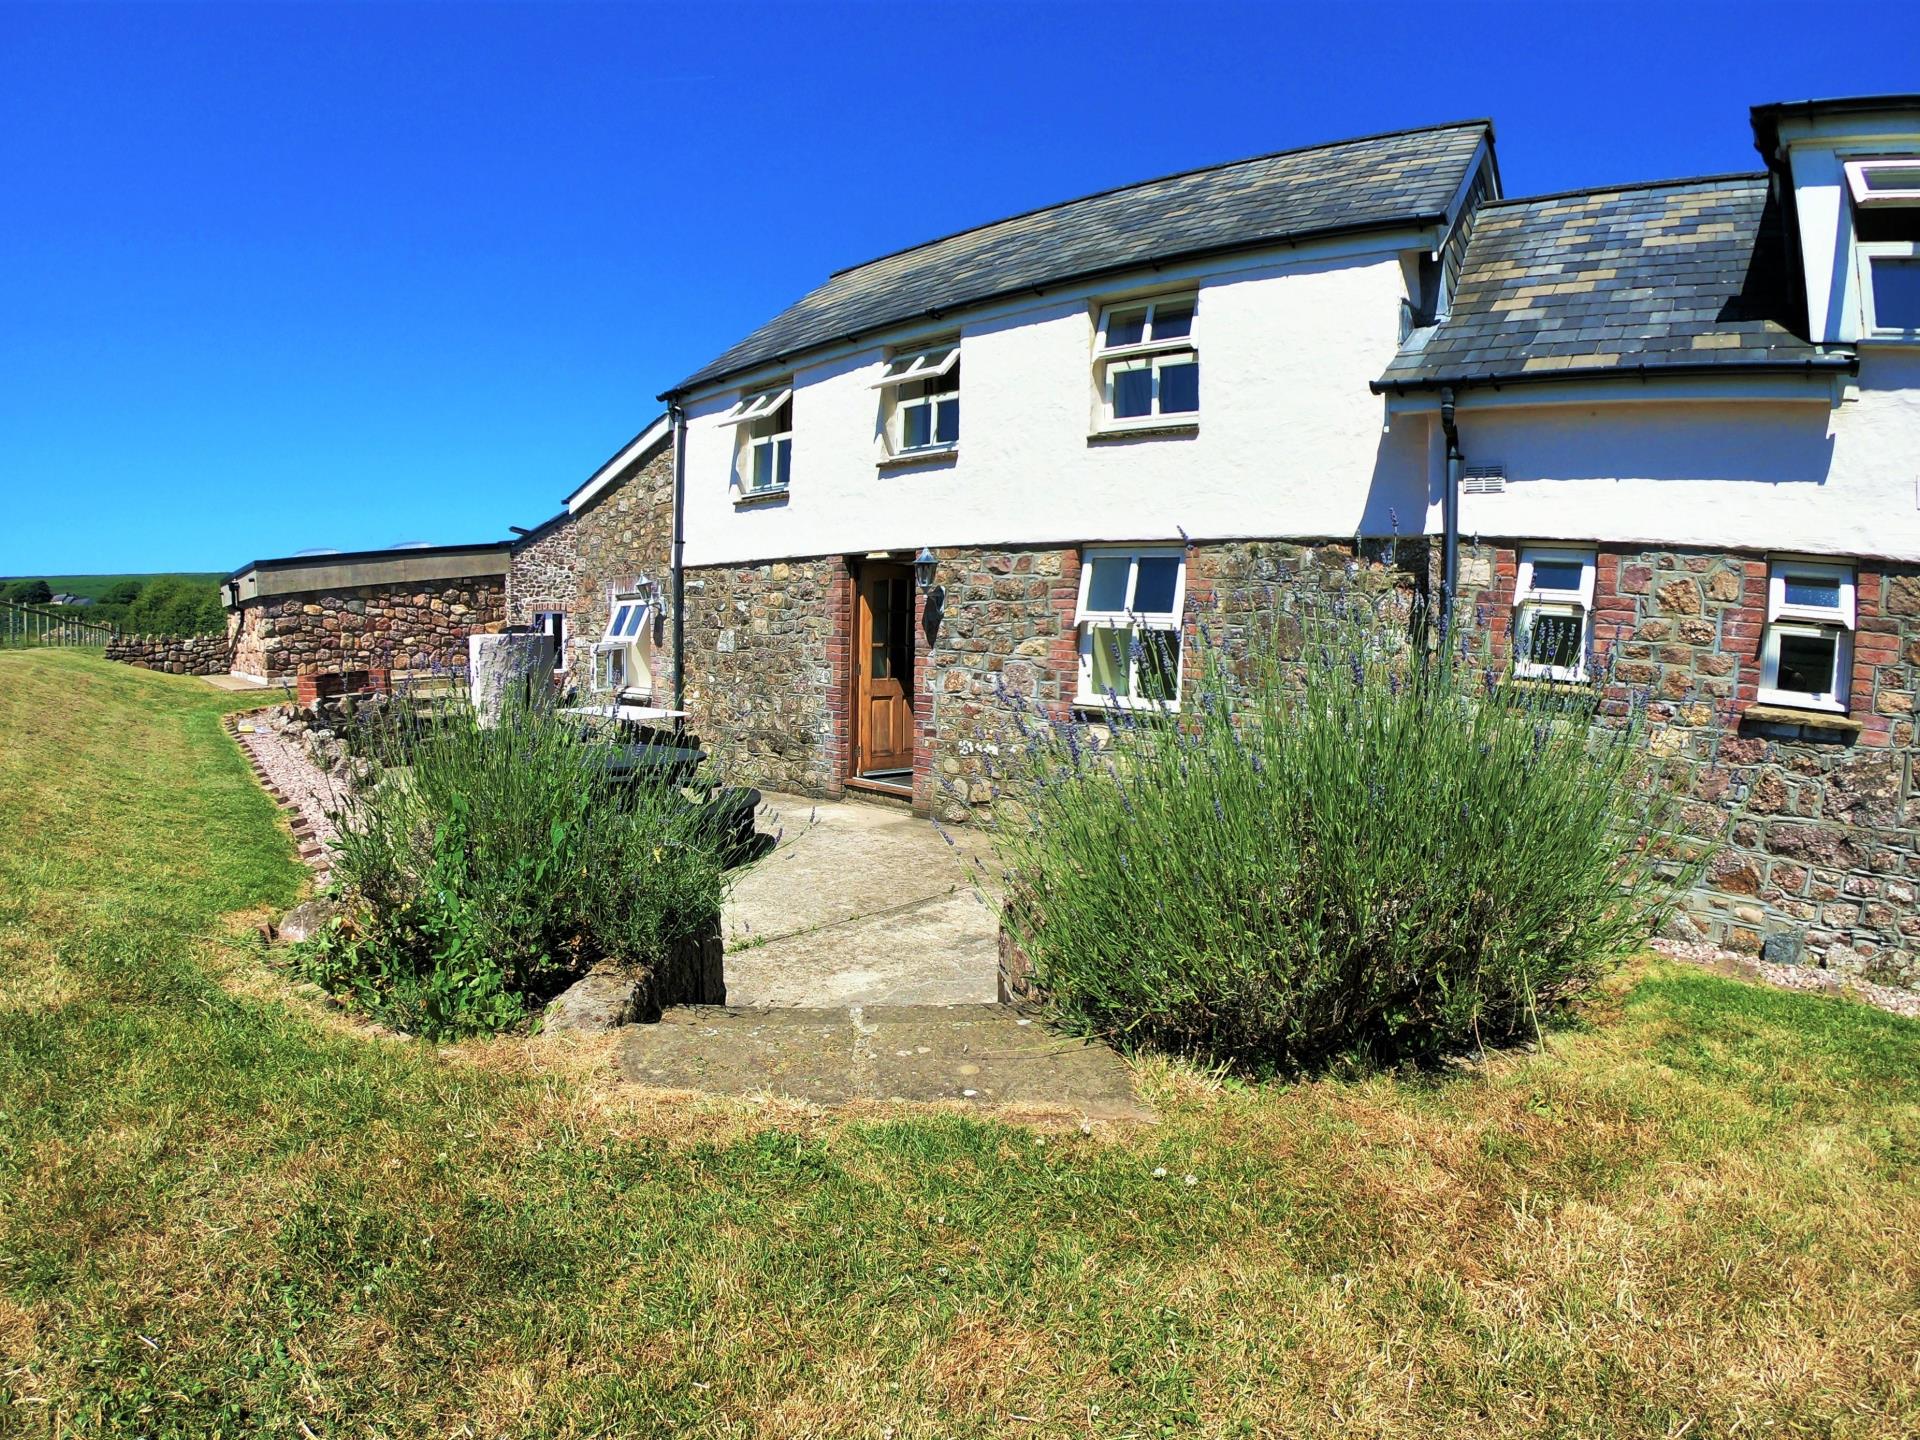 Group accommodation for retreats in Wales